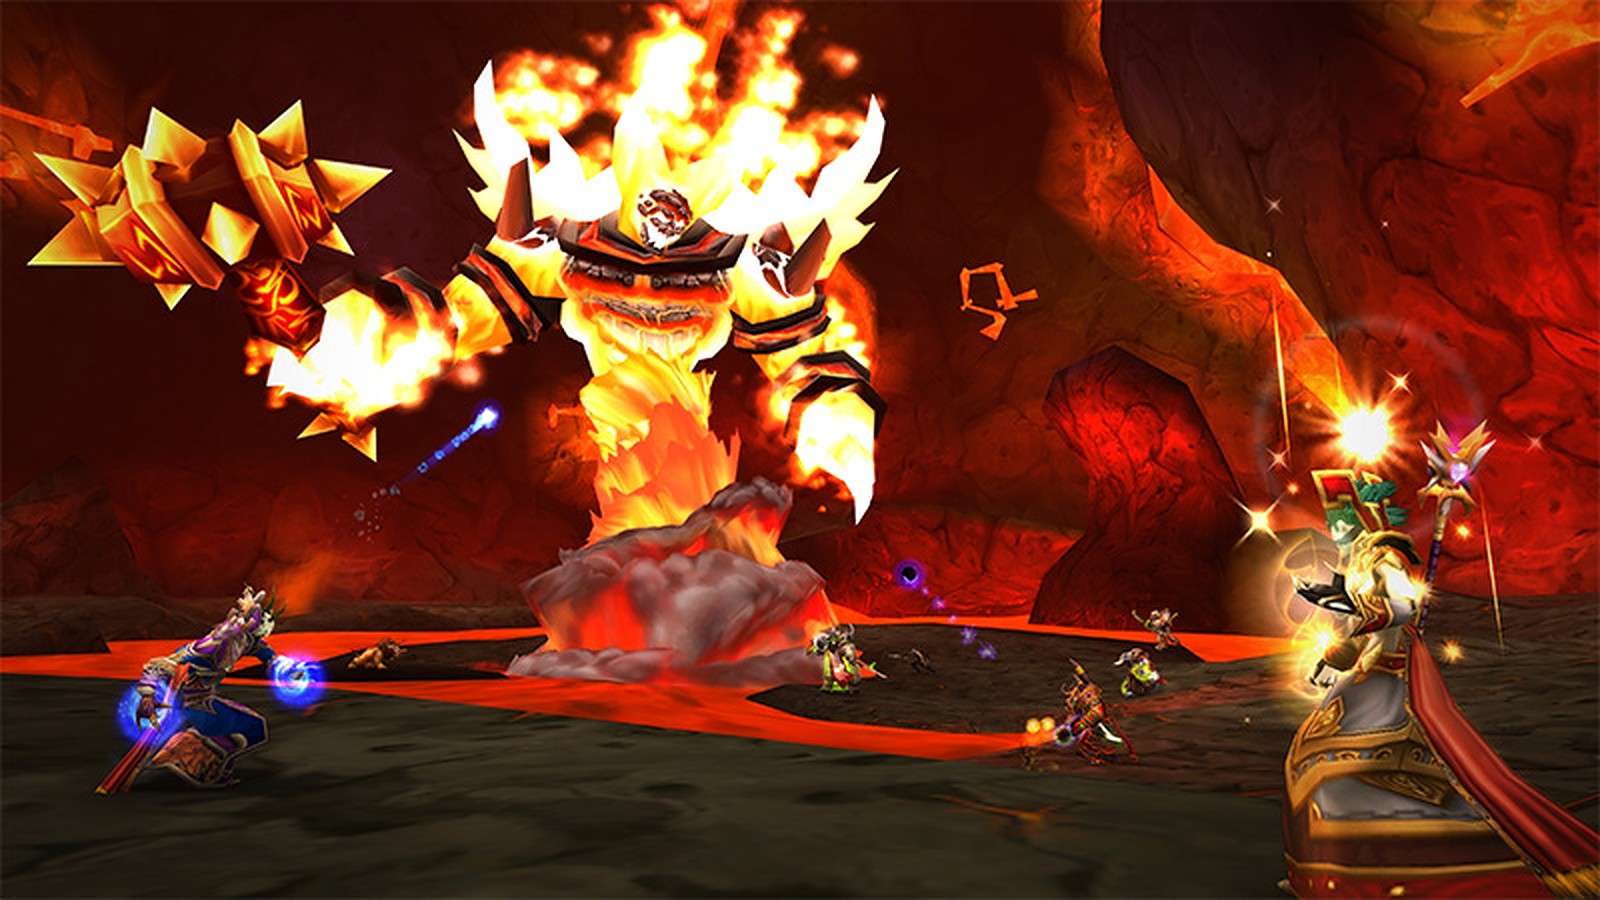 Players fight Ragnaros in Season of Discovery